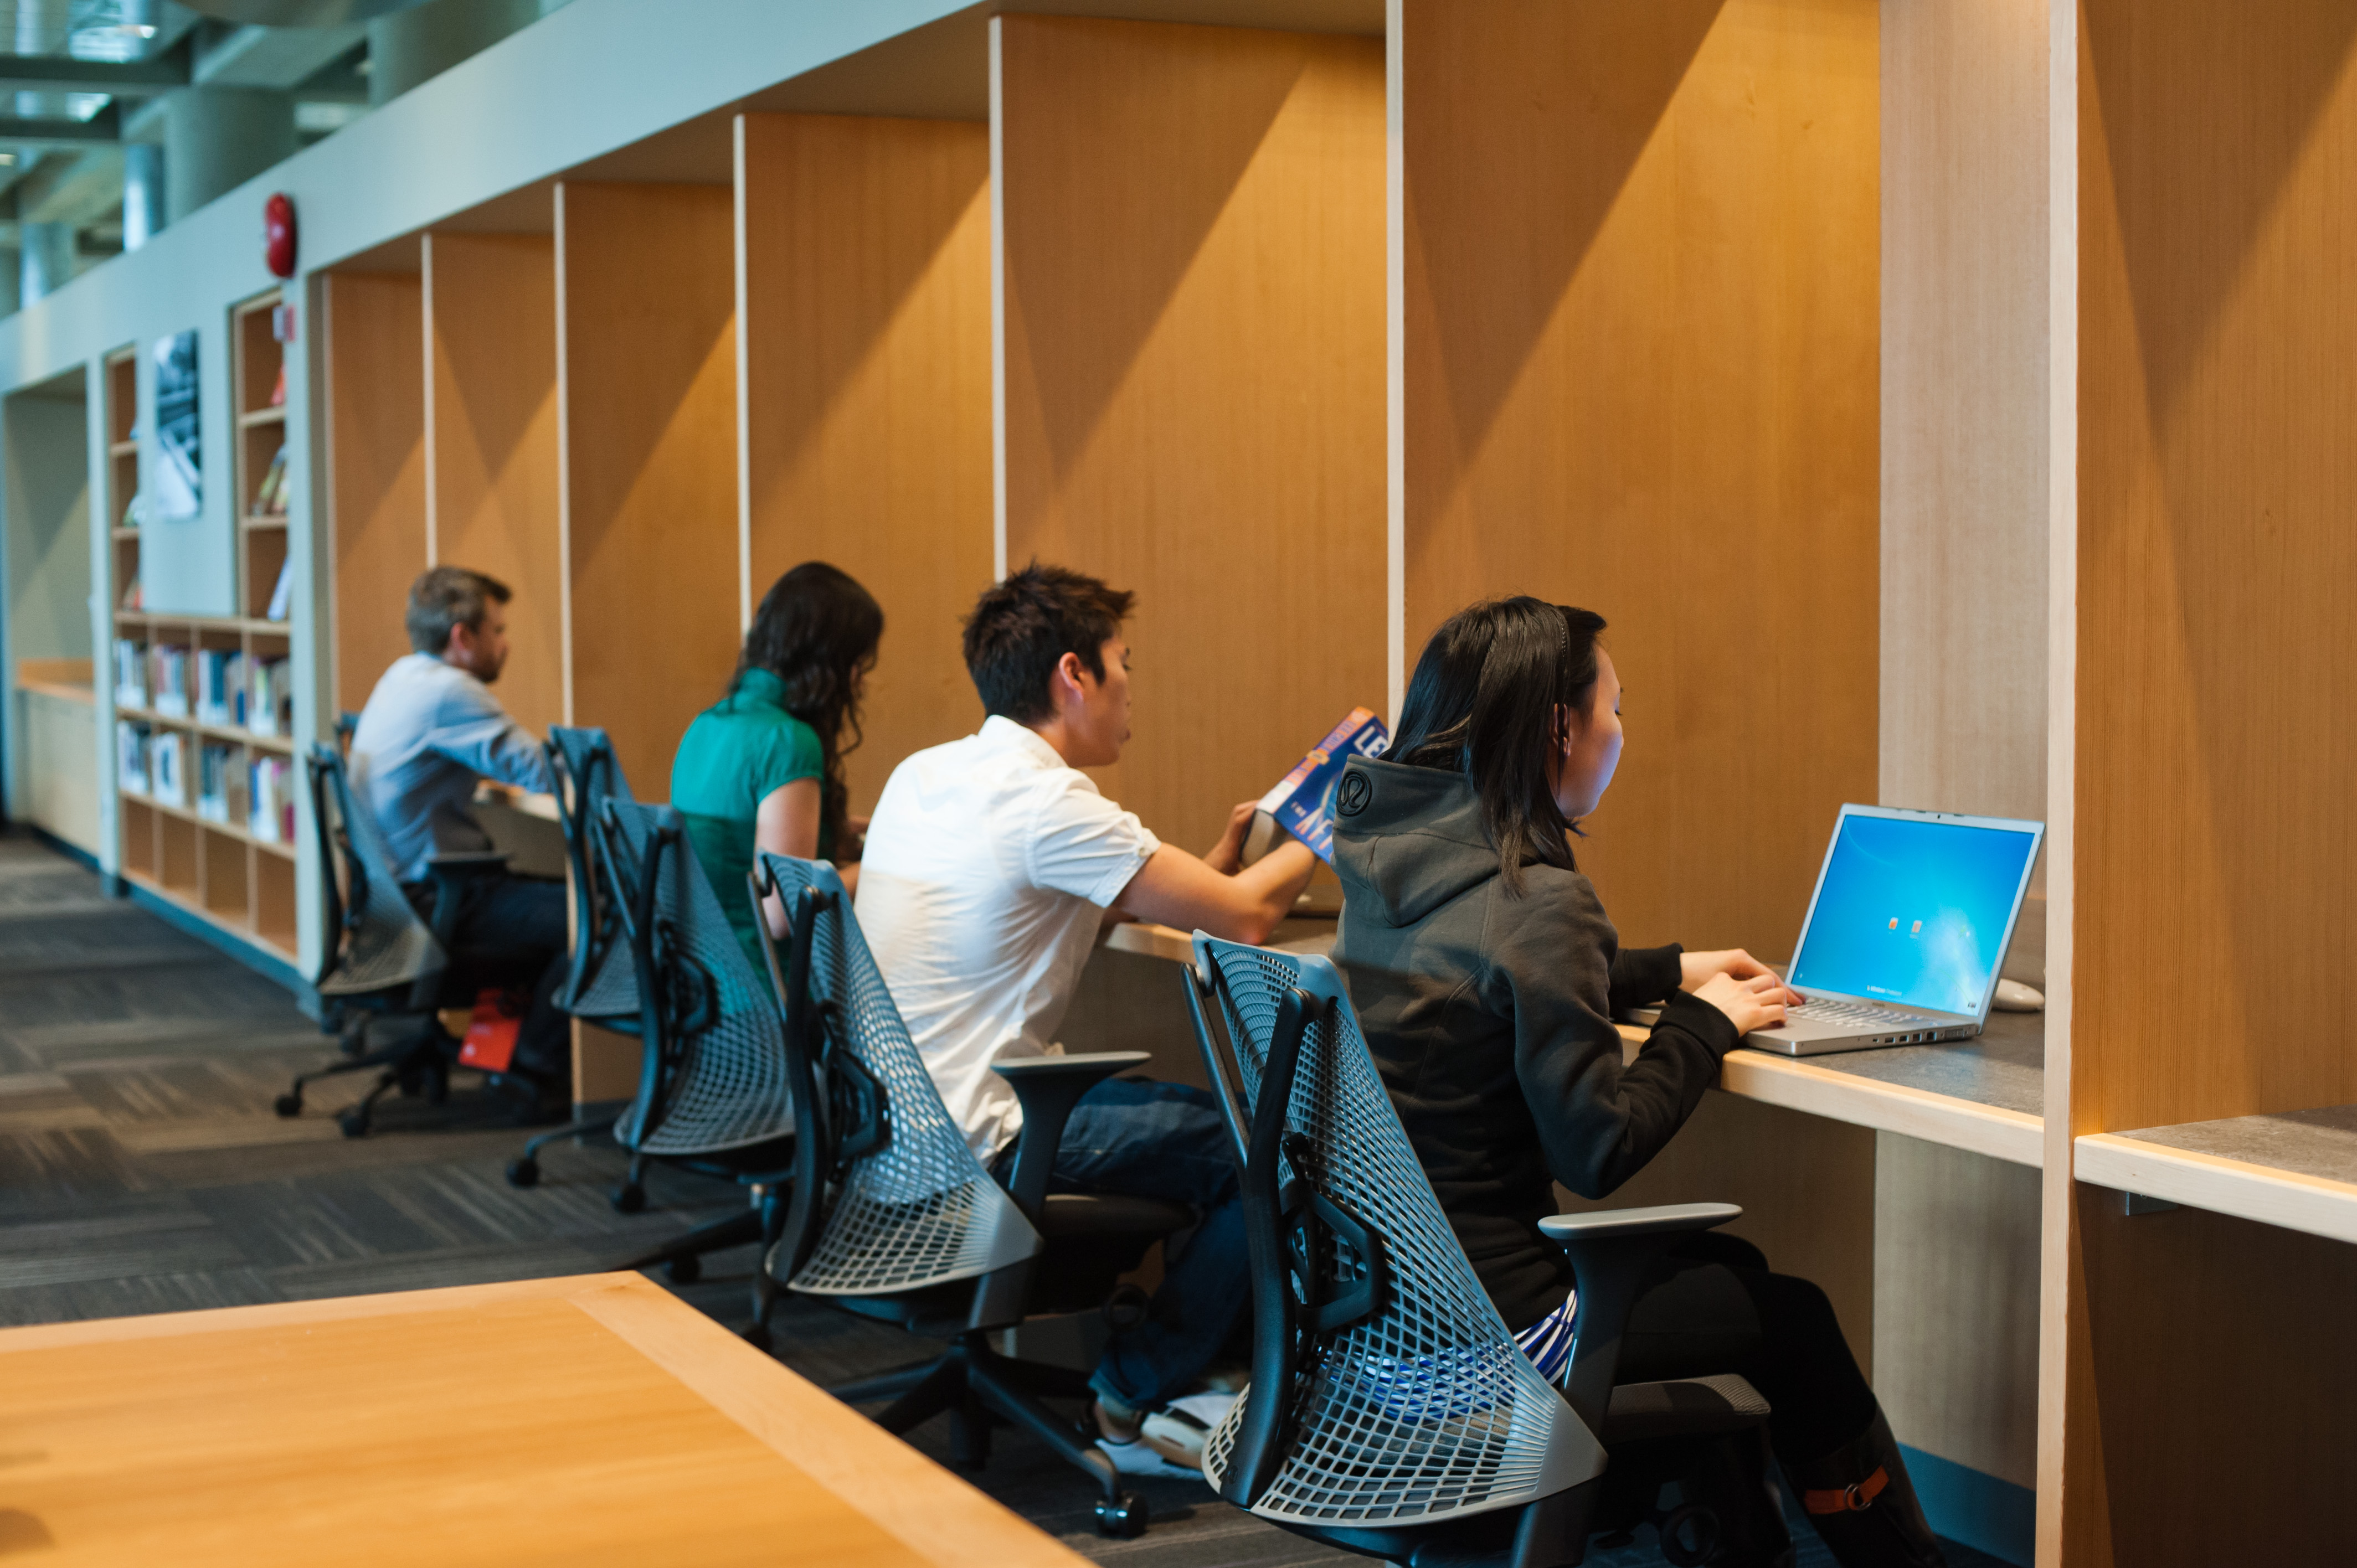 Students with laptops seated at cubicles